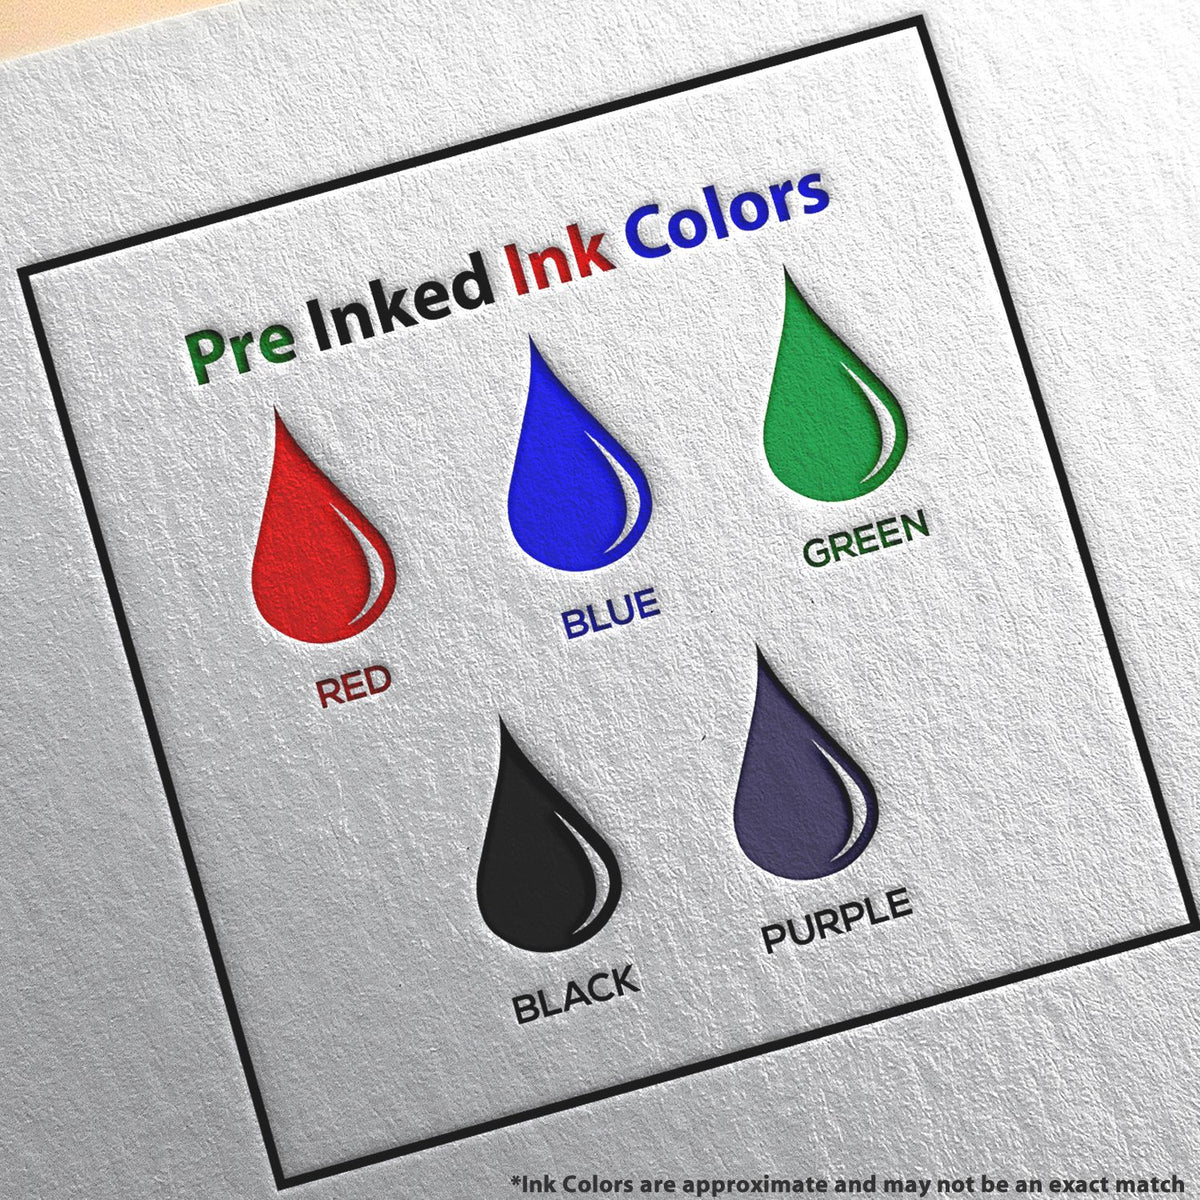 A picture showing the different ink colors or hues available for the Premium MaxLight Pre-Inked West Virginia Landscape Architectural Stamp product.